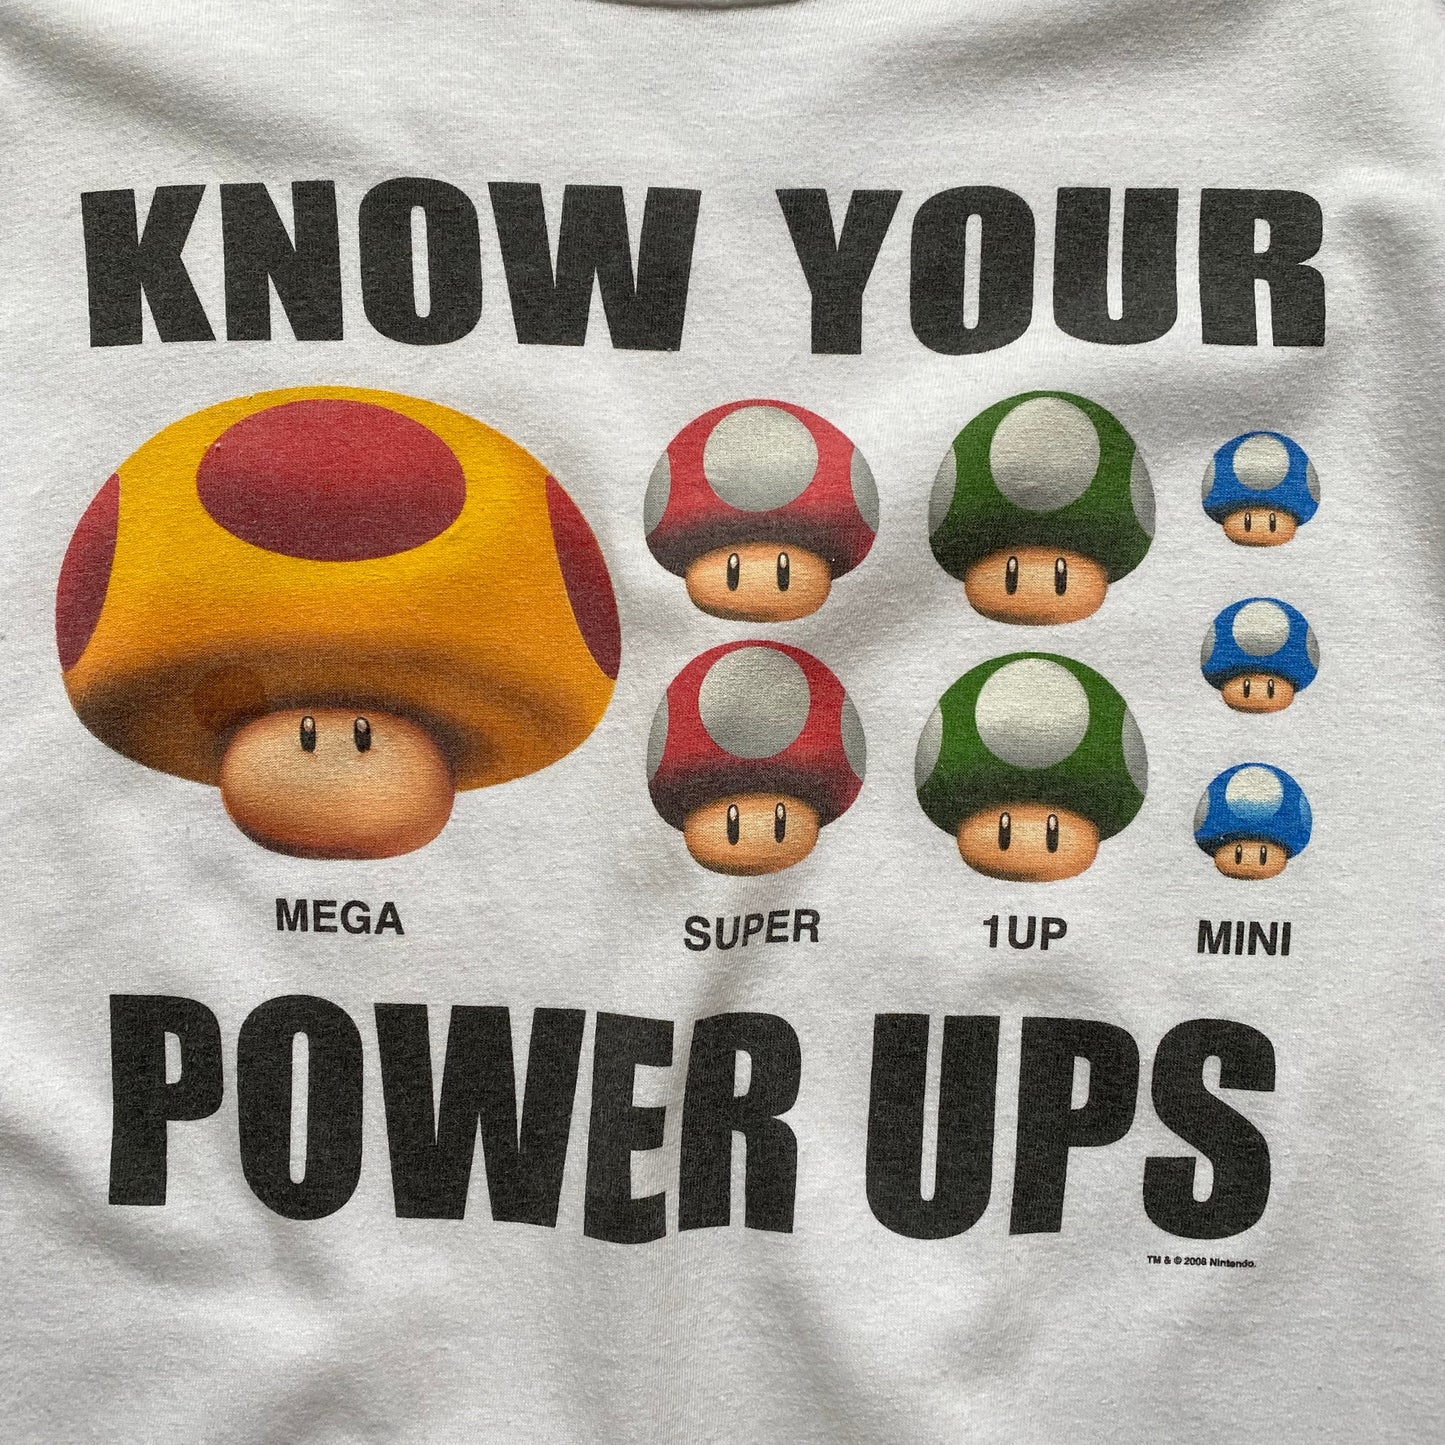 00’s NINTENDO "KNOW YOUR POWER UPS" T-SHIRT